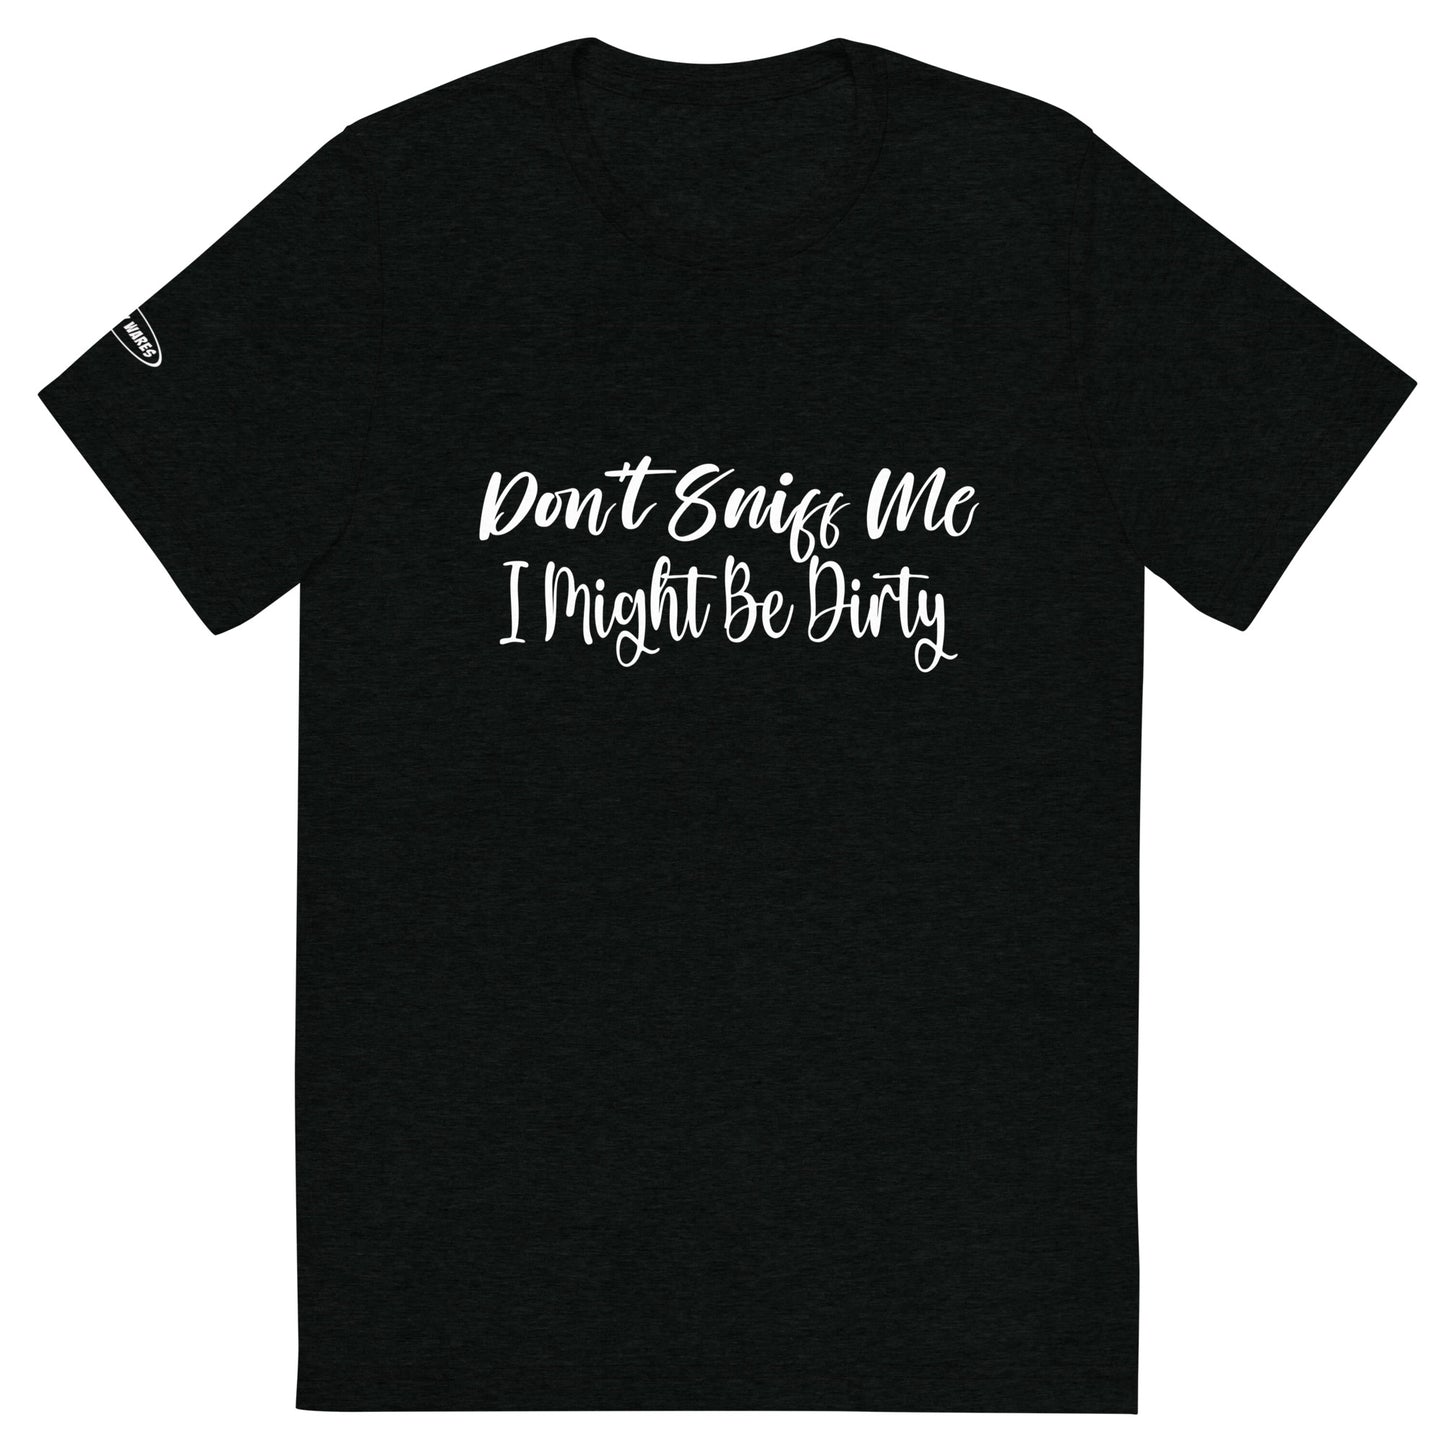 CLASSY - Don't Sniff Me - I might be Dirty - Funny T-Shirt